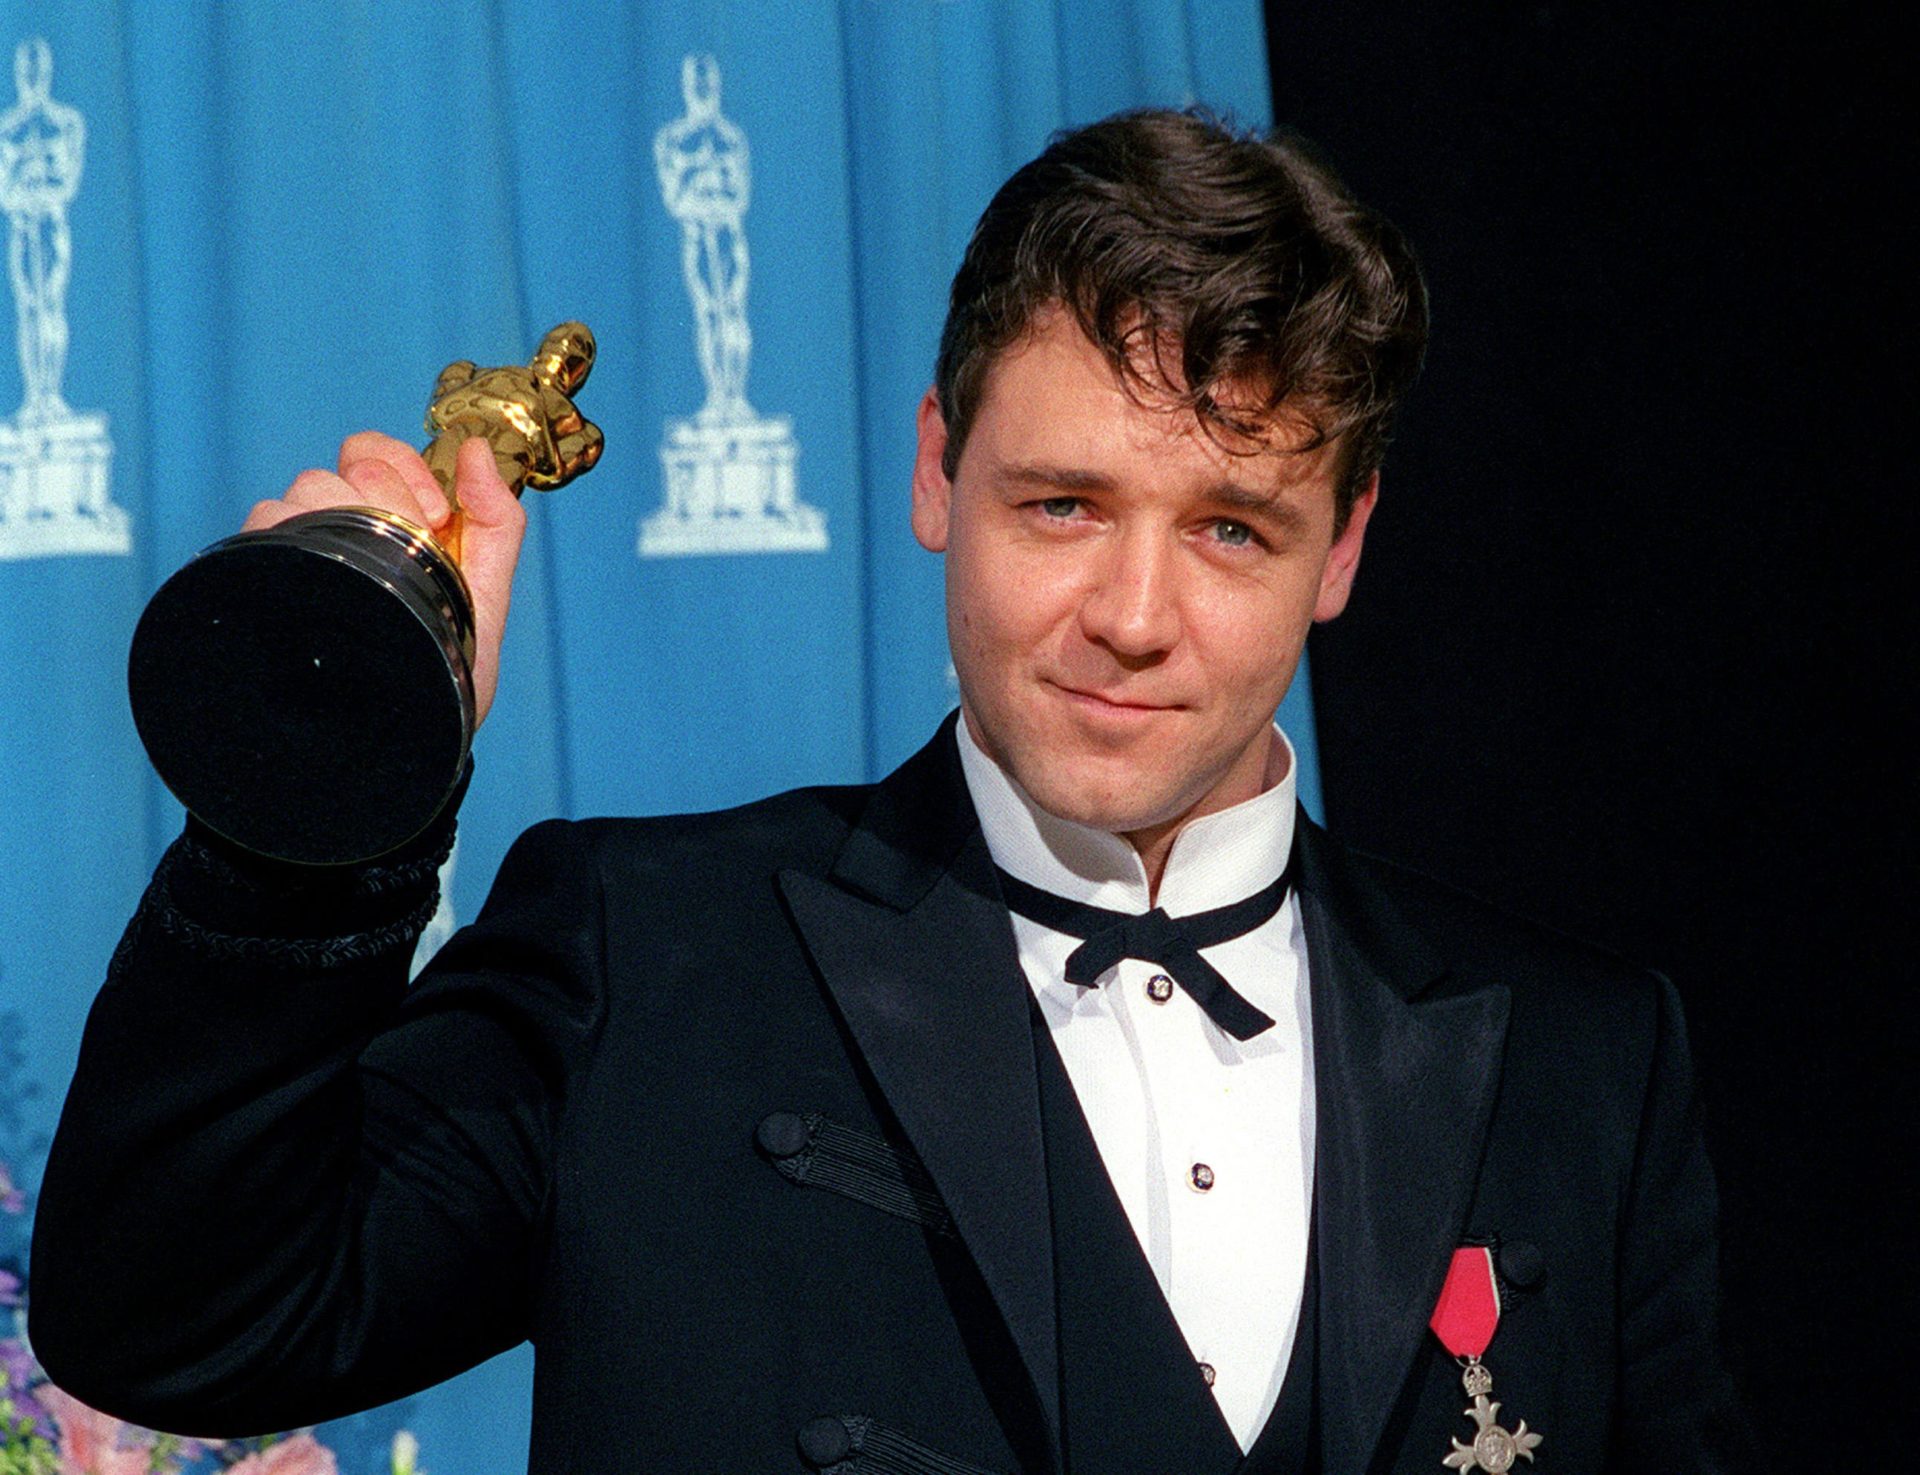 Russell Crowe at the 73rd Annual Academy Awards, 2001. Image: PictureLux / The Hollywood Archive / Alamy Stock Photo